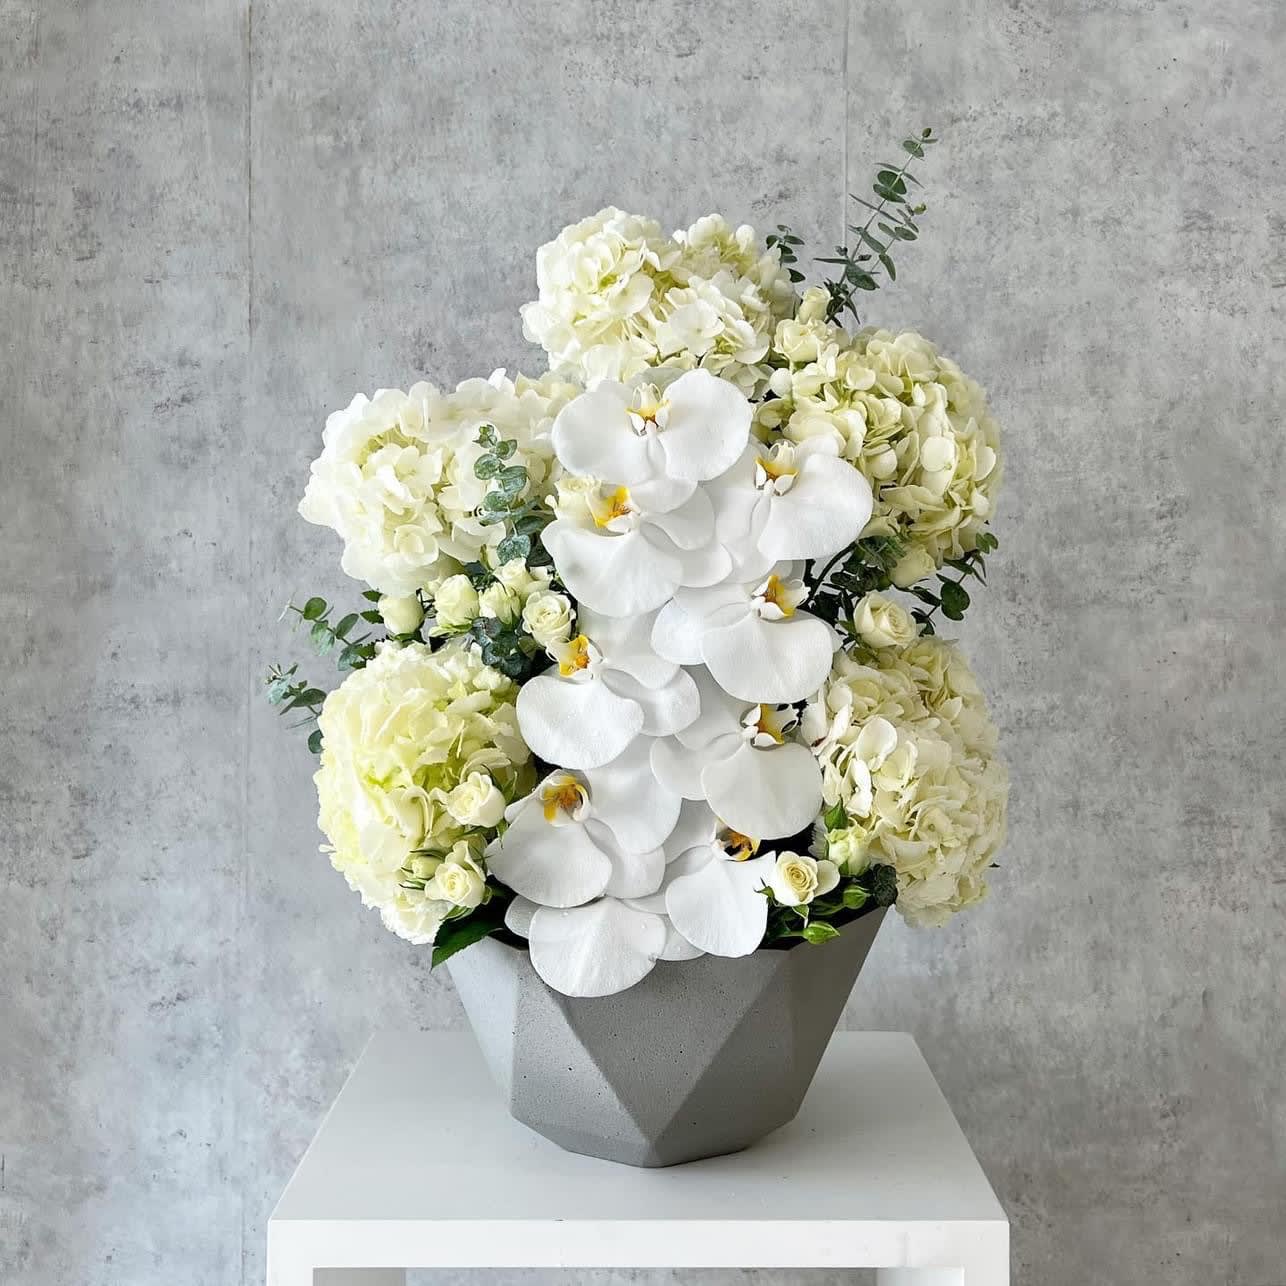 Orchid Hydrangeas modern design - Standard- Your order will be arranged approximately as shown on our website